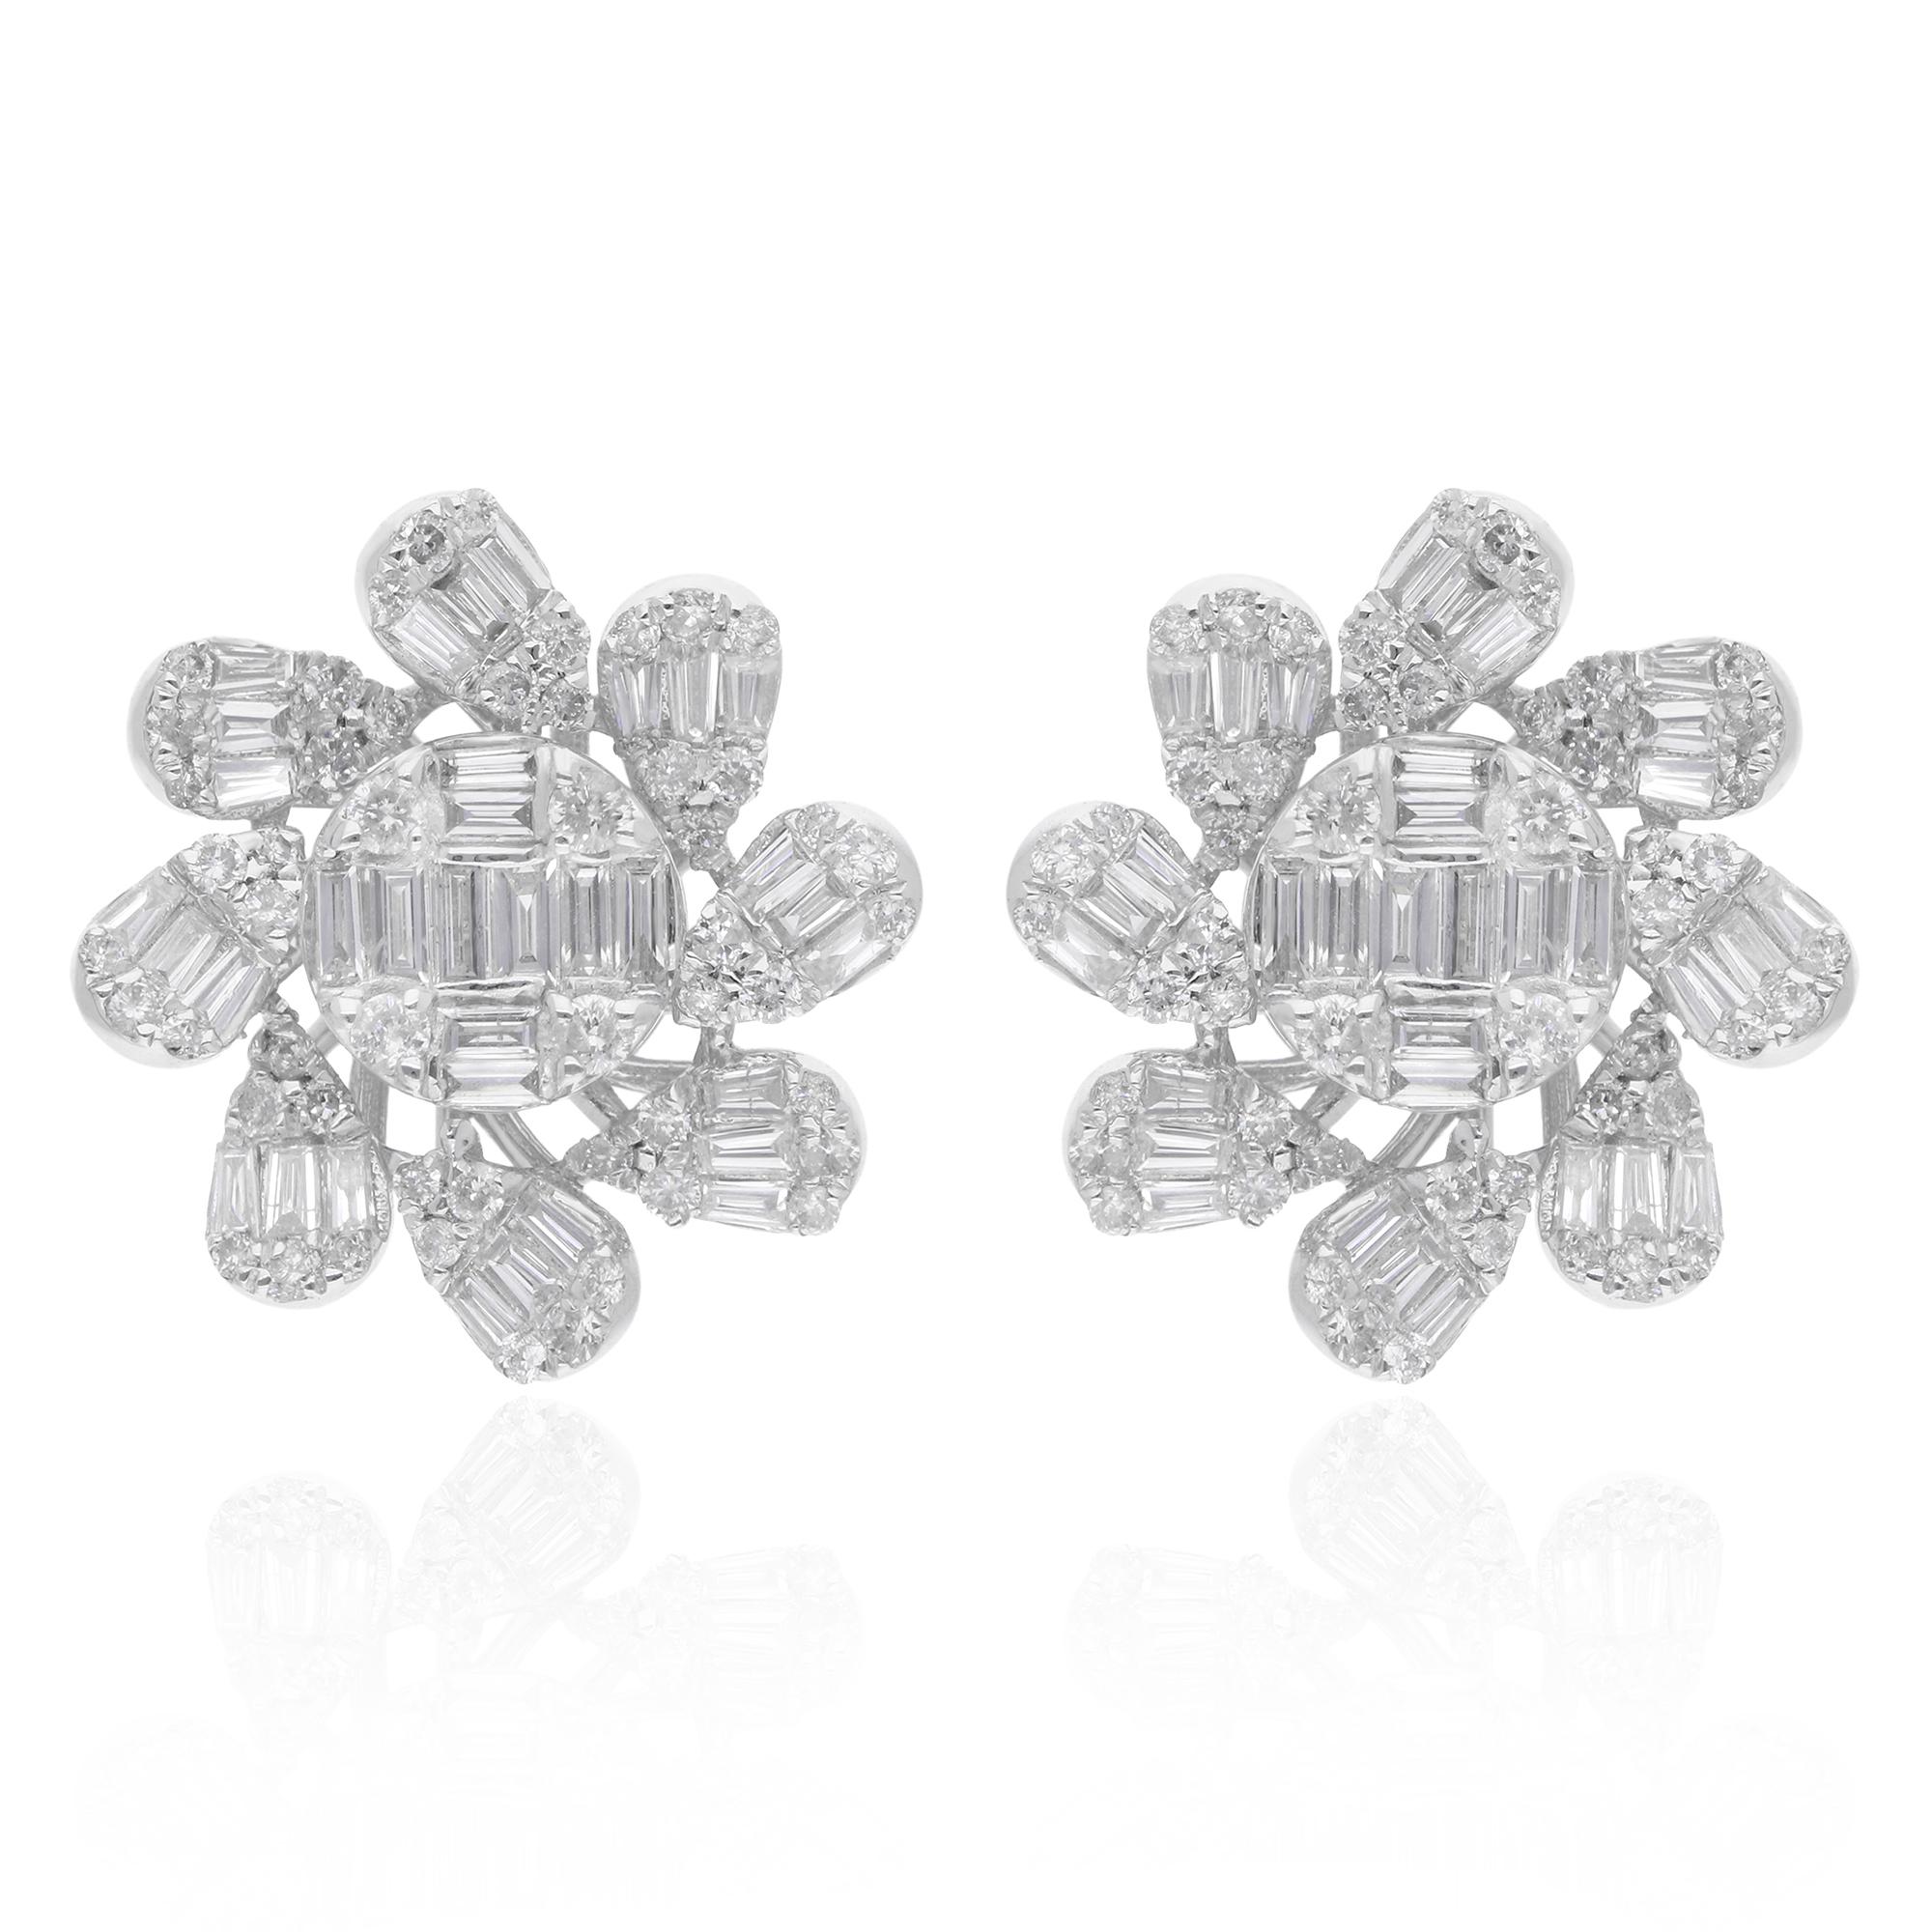 Illuminate your ensemble with the enchanting brilliance of these Baguette & Round Diamond Flower Design Earrings, crafted to perfection in 14 karat white gold. Inspired by the delicate beauty of flowers, these earrings exude a timeless elegance and